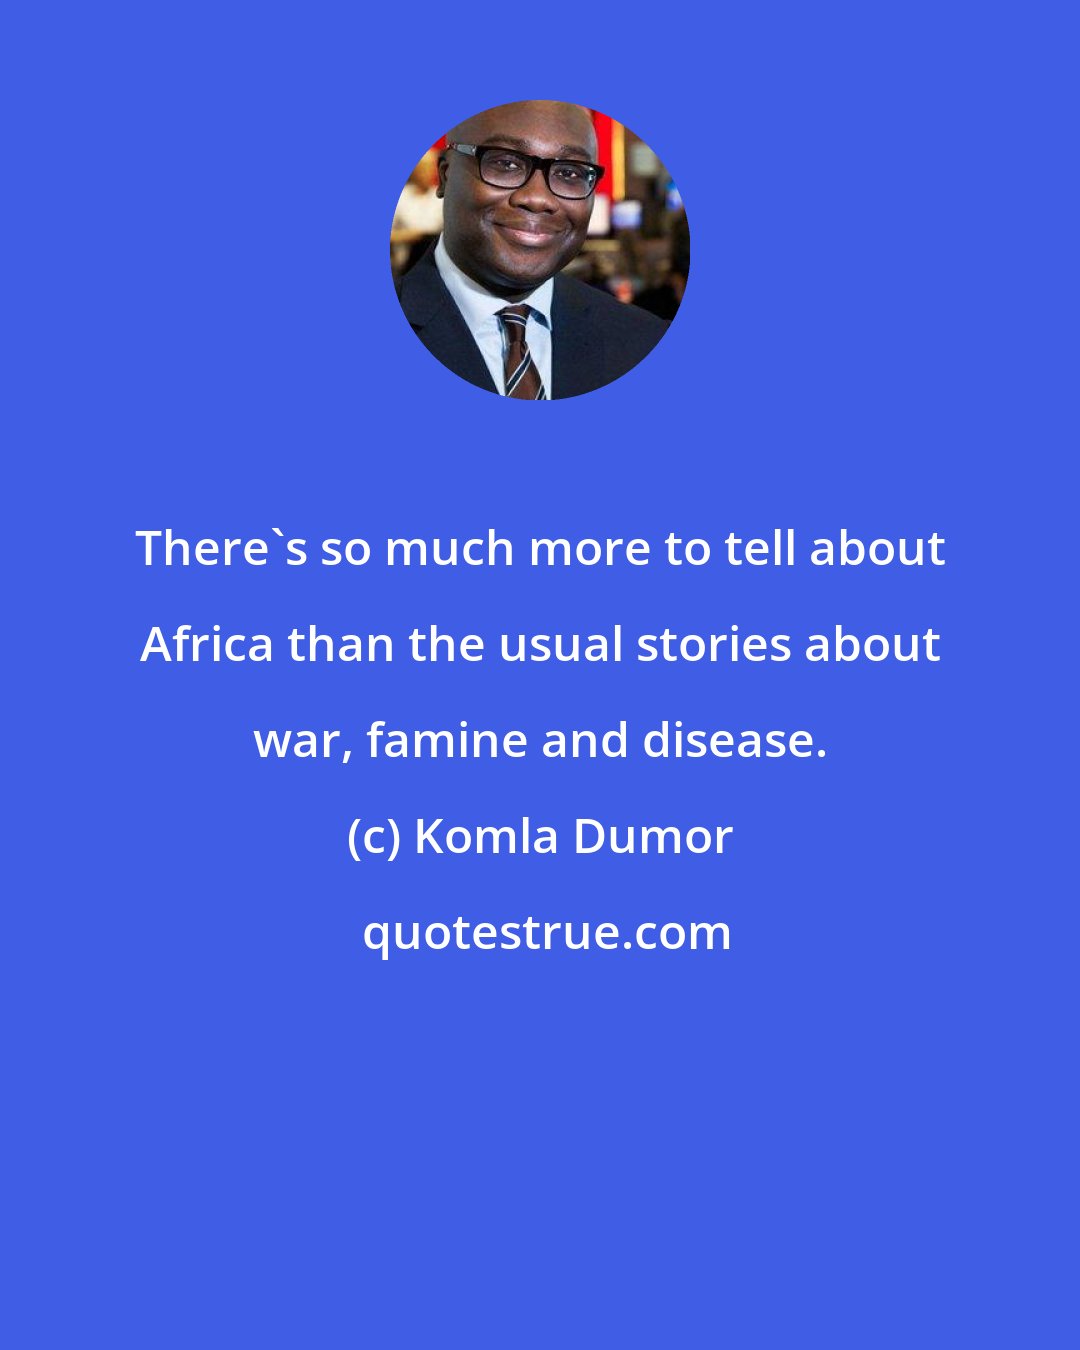 Komla Dumor: There's so much more to tell about Africa than the usual stories about war, famine and disease.